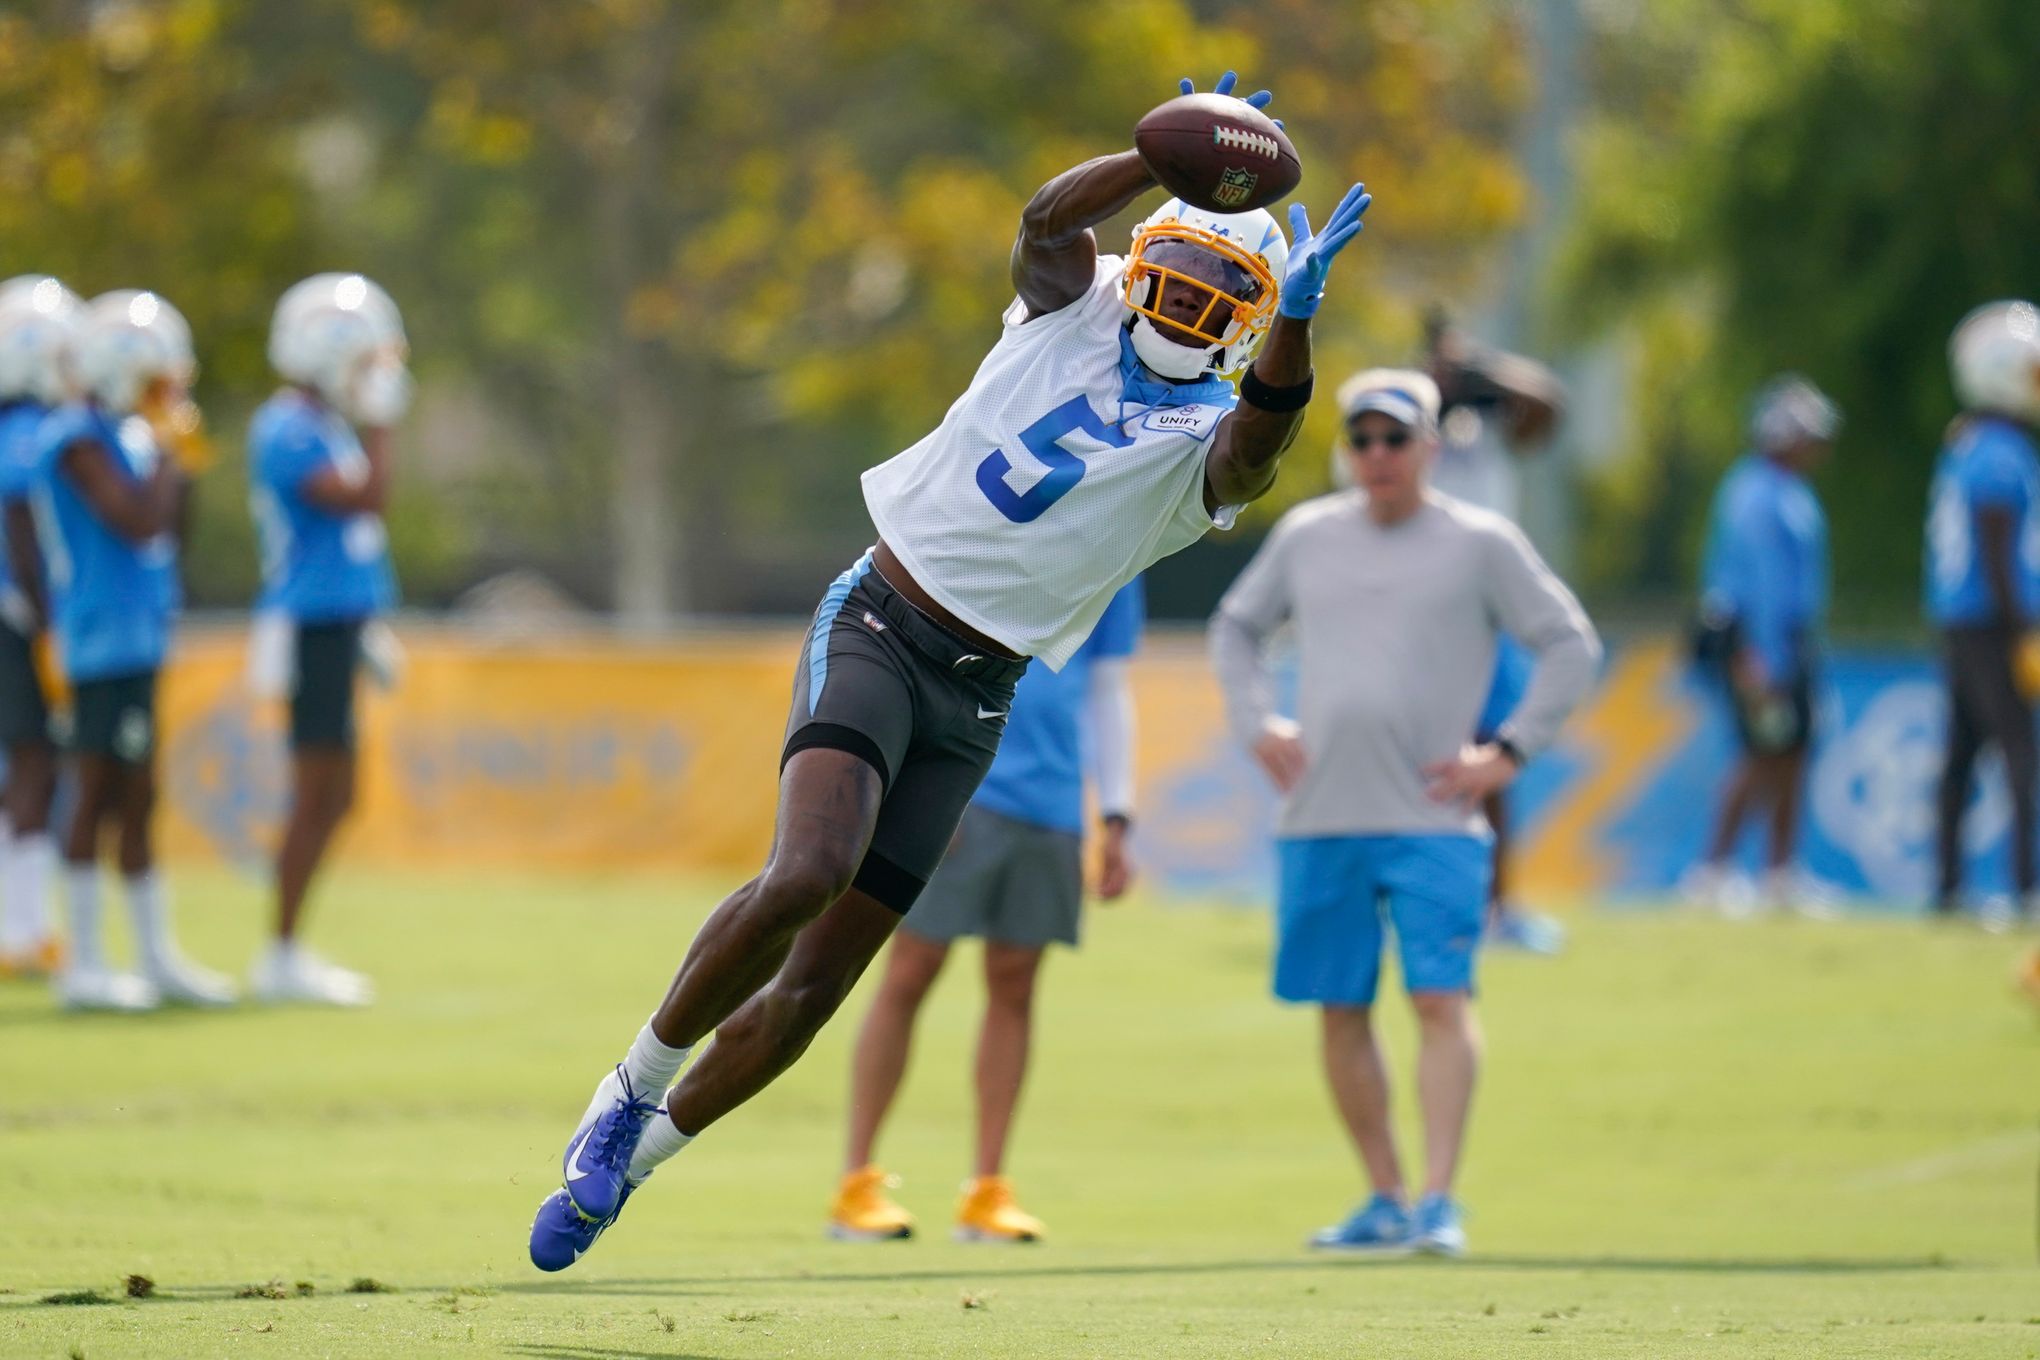 Chargers receiver Joshua Palmer could have more stories to tell in